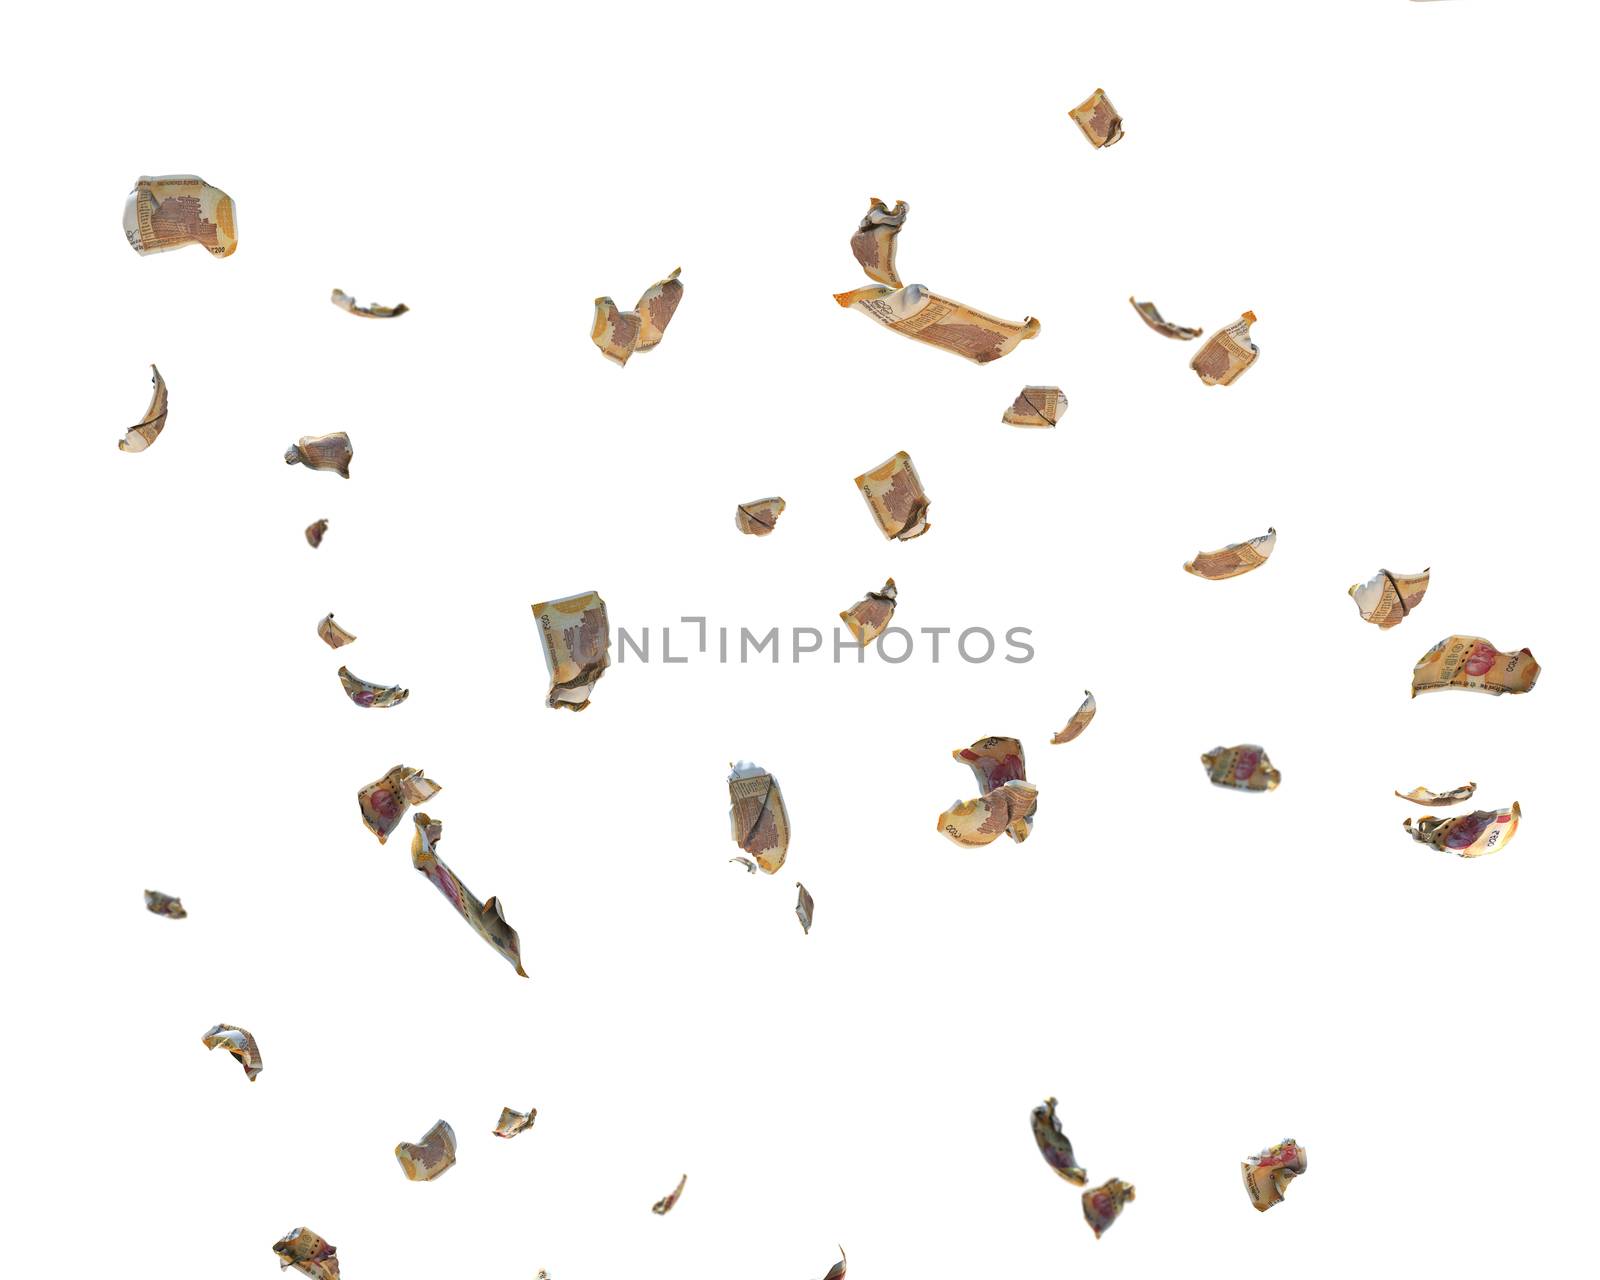 200 Indian Rupee Currency Crumpled Banknotes flying, against white, clipping path included